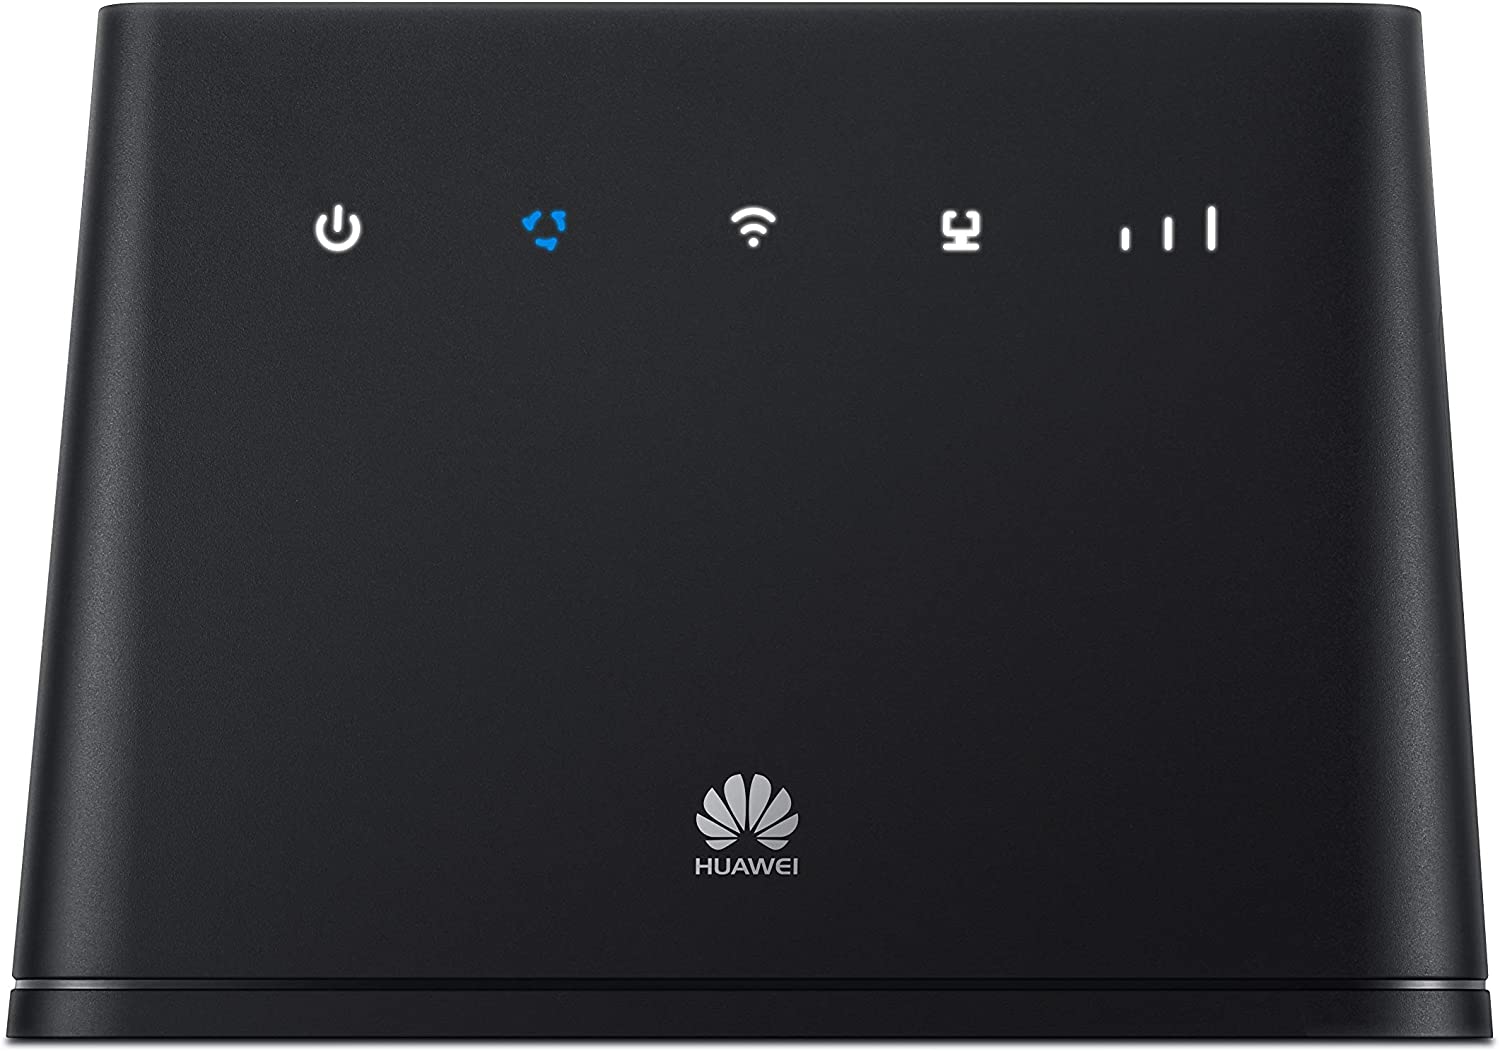 Huawei B535-4G Mobile Wi-Fi Router 300Mbps CAT 7 Unlocked for All Networks, Black